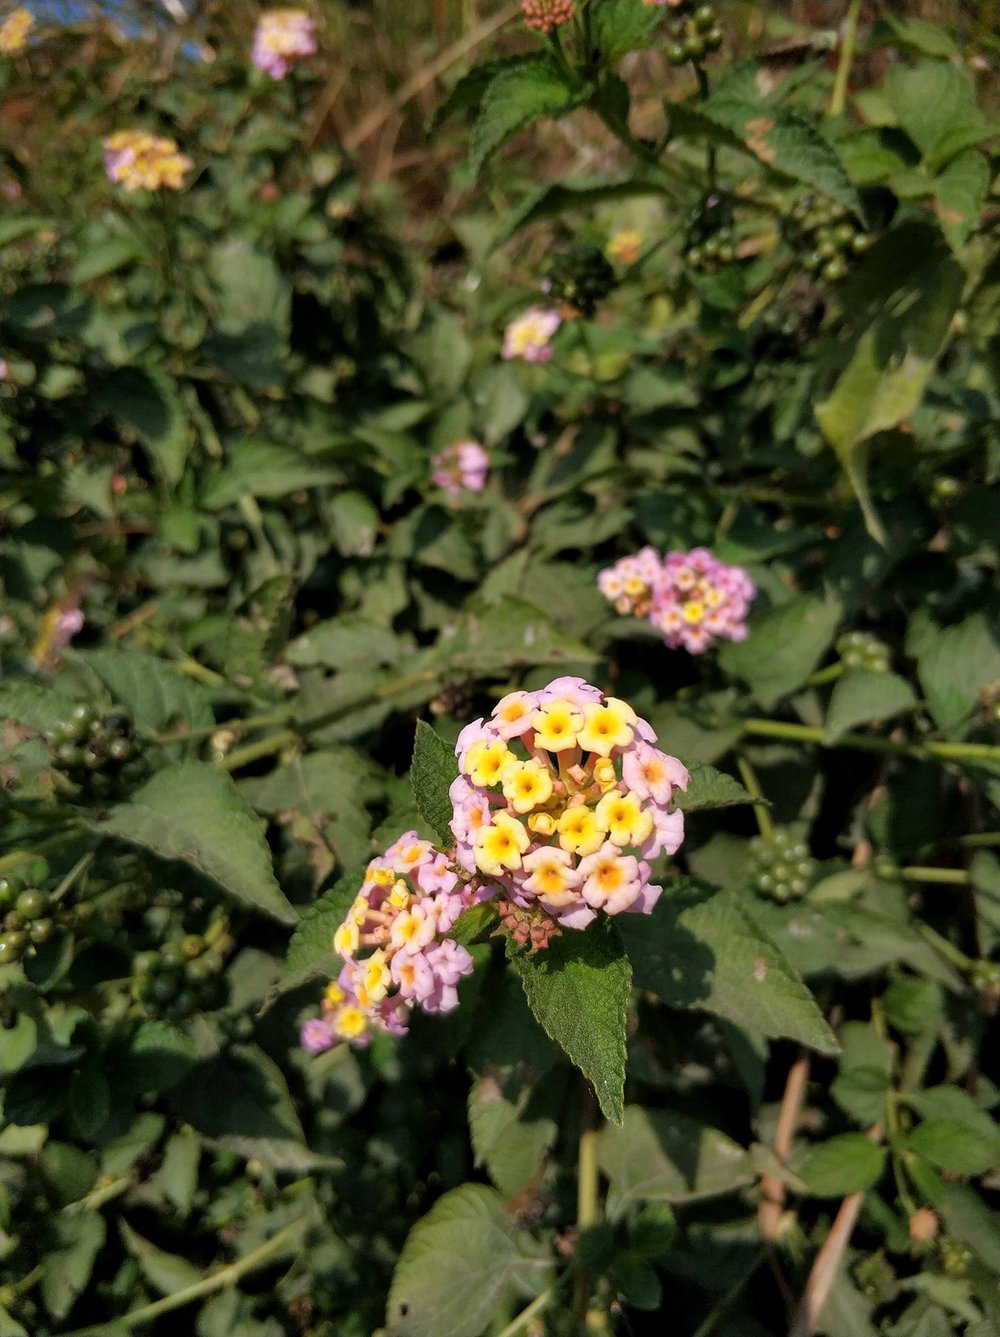  Not gonna lie, when we saw these beautiful flowers all we could think was ‘pink and yellow golf balls - cool!' 